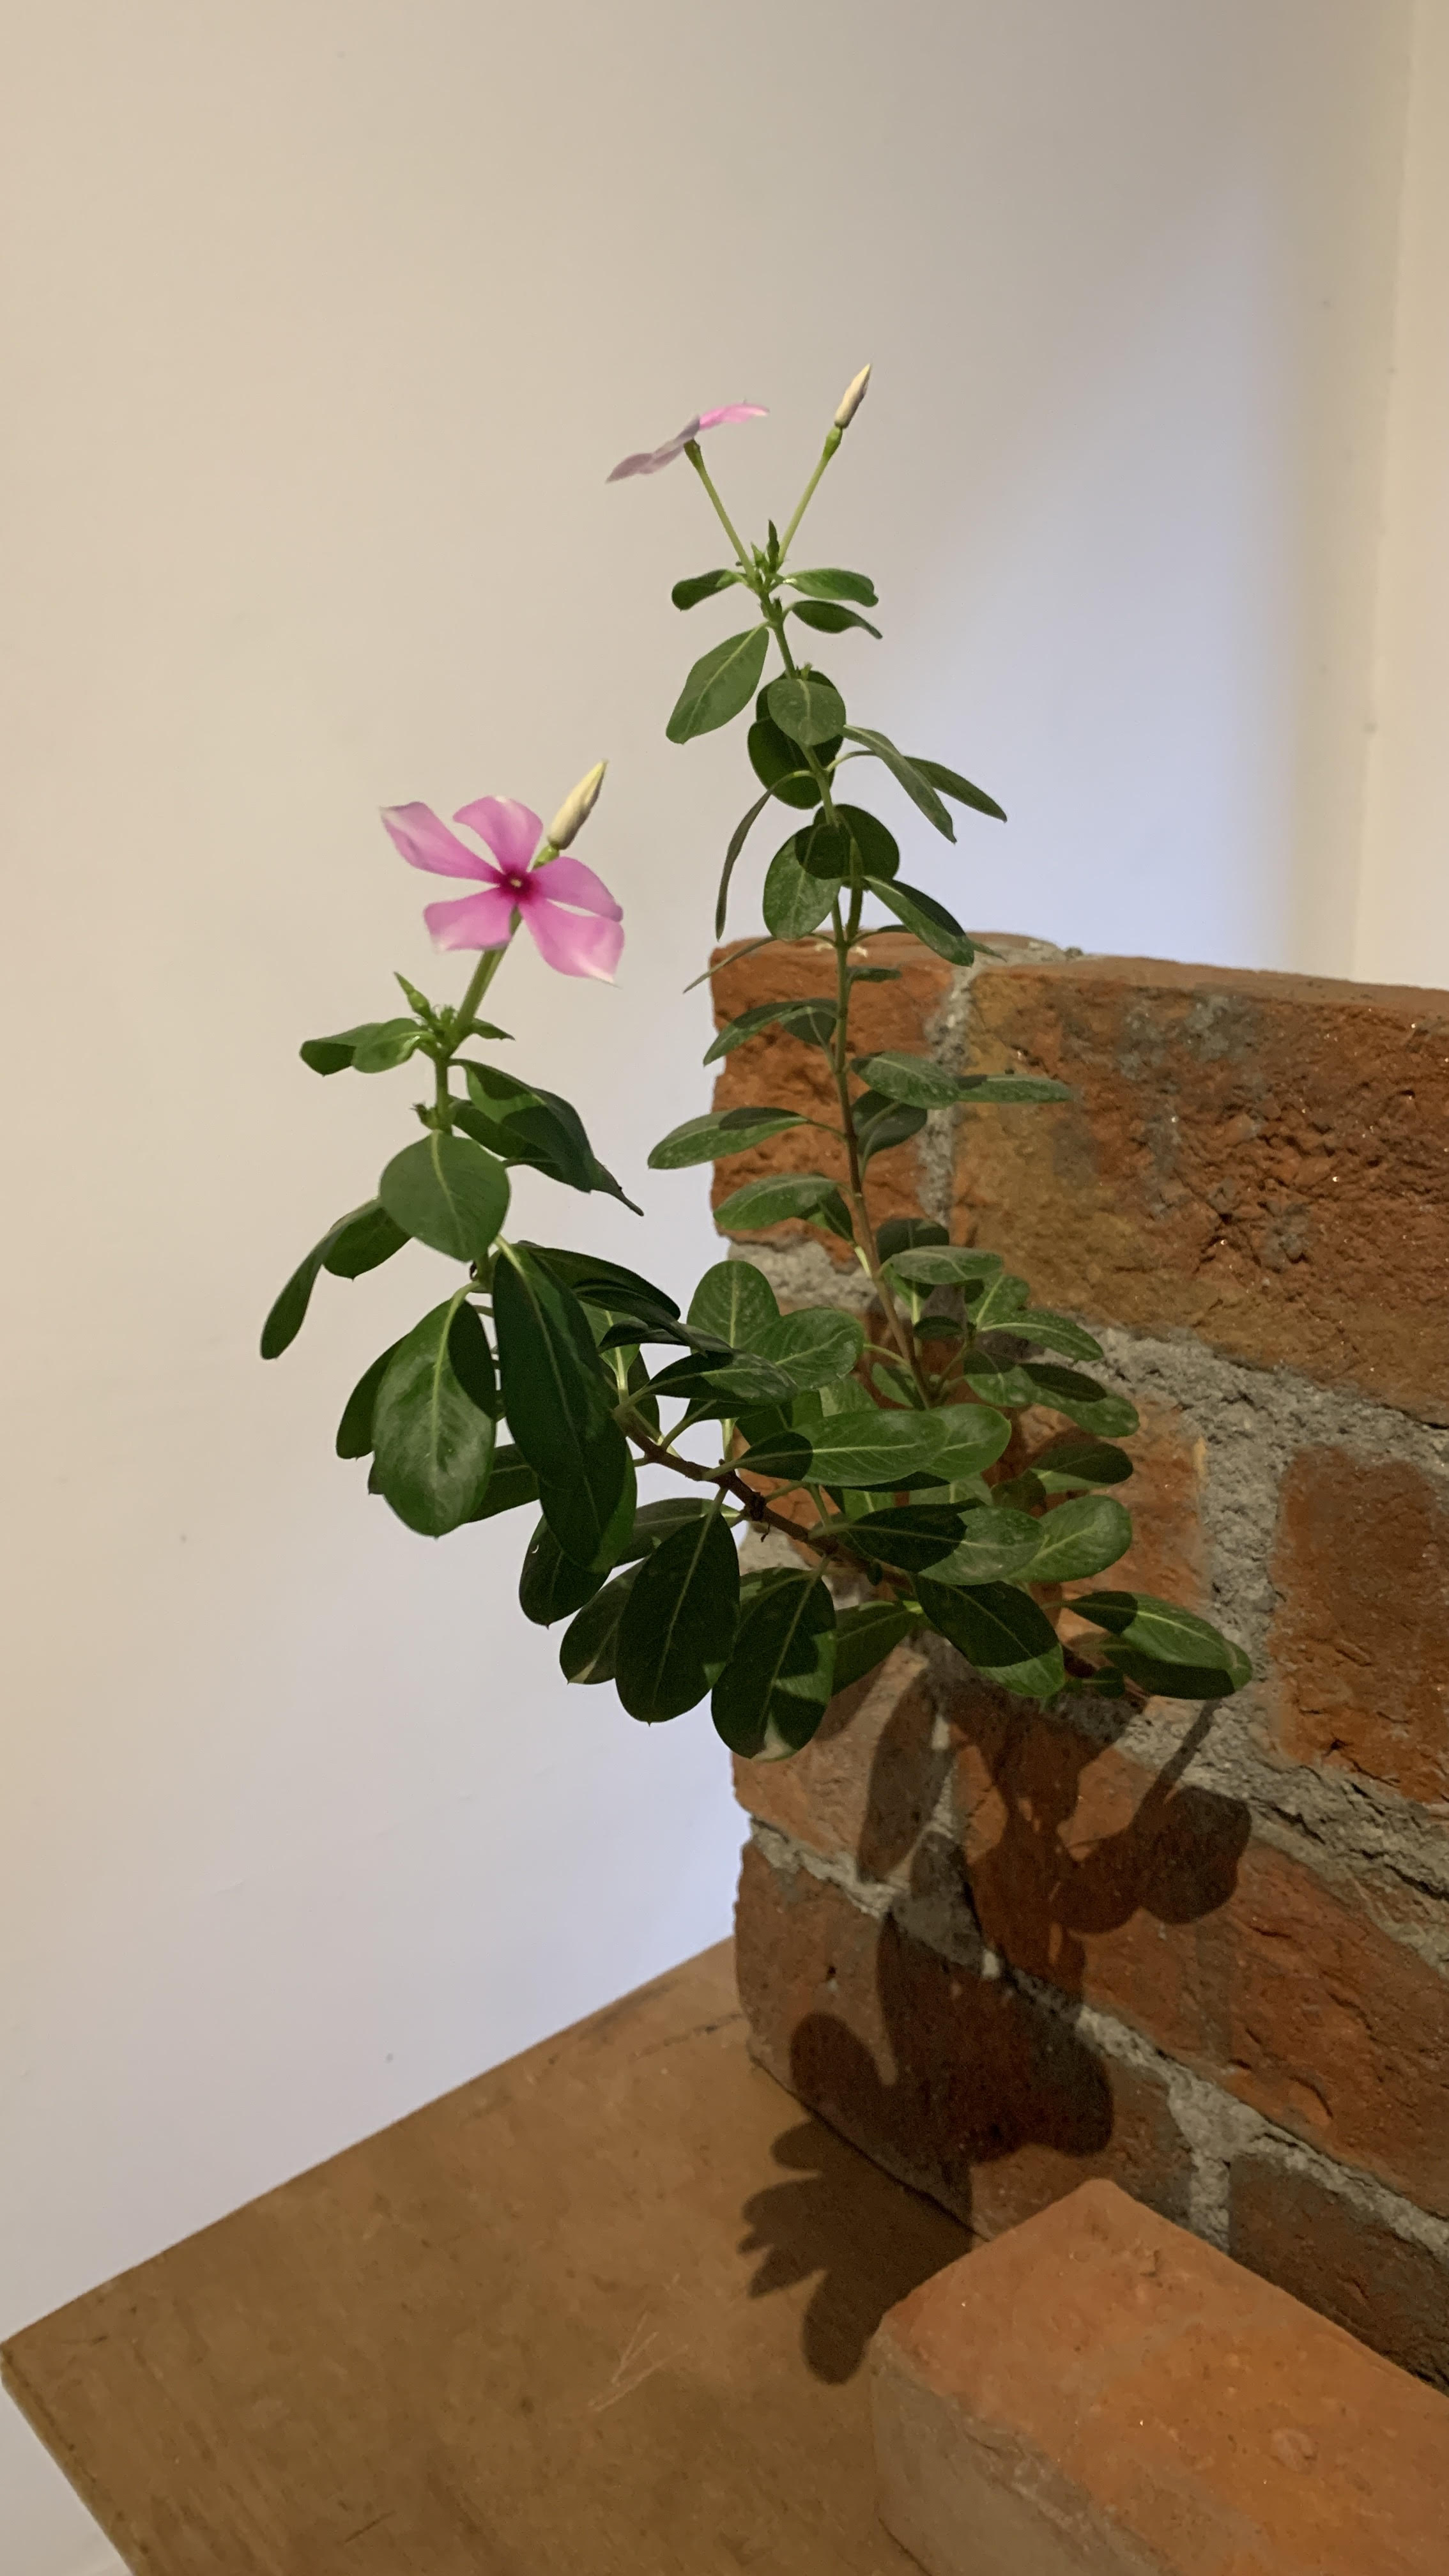 a ‘sadabahar’ [the name translates to ‘always prosperous’] plant grow in the limited resources of a brick wall crack